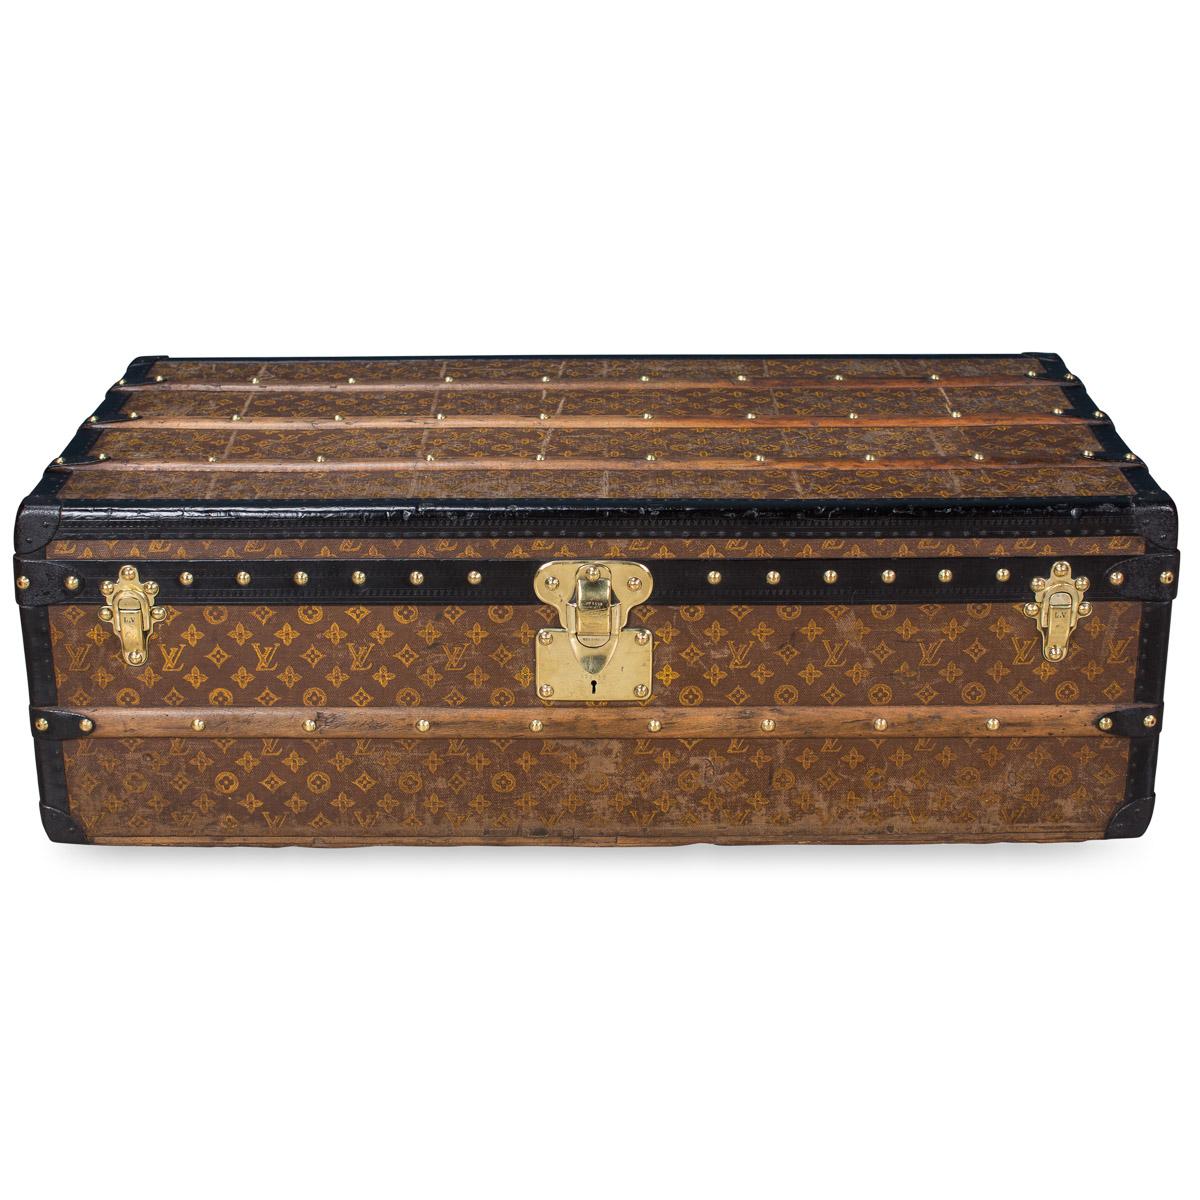 Stunning and most importantly complete, this early 20th century Louis Vuitton cabin trunk was the must have item of any elite traveller. Covered in the world famous LV monogrammed canvas, with black lozine borders and brass locks. Oozing style and